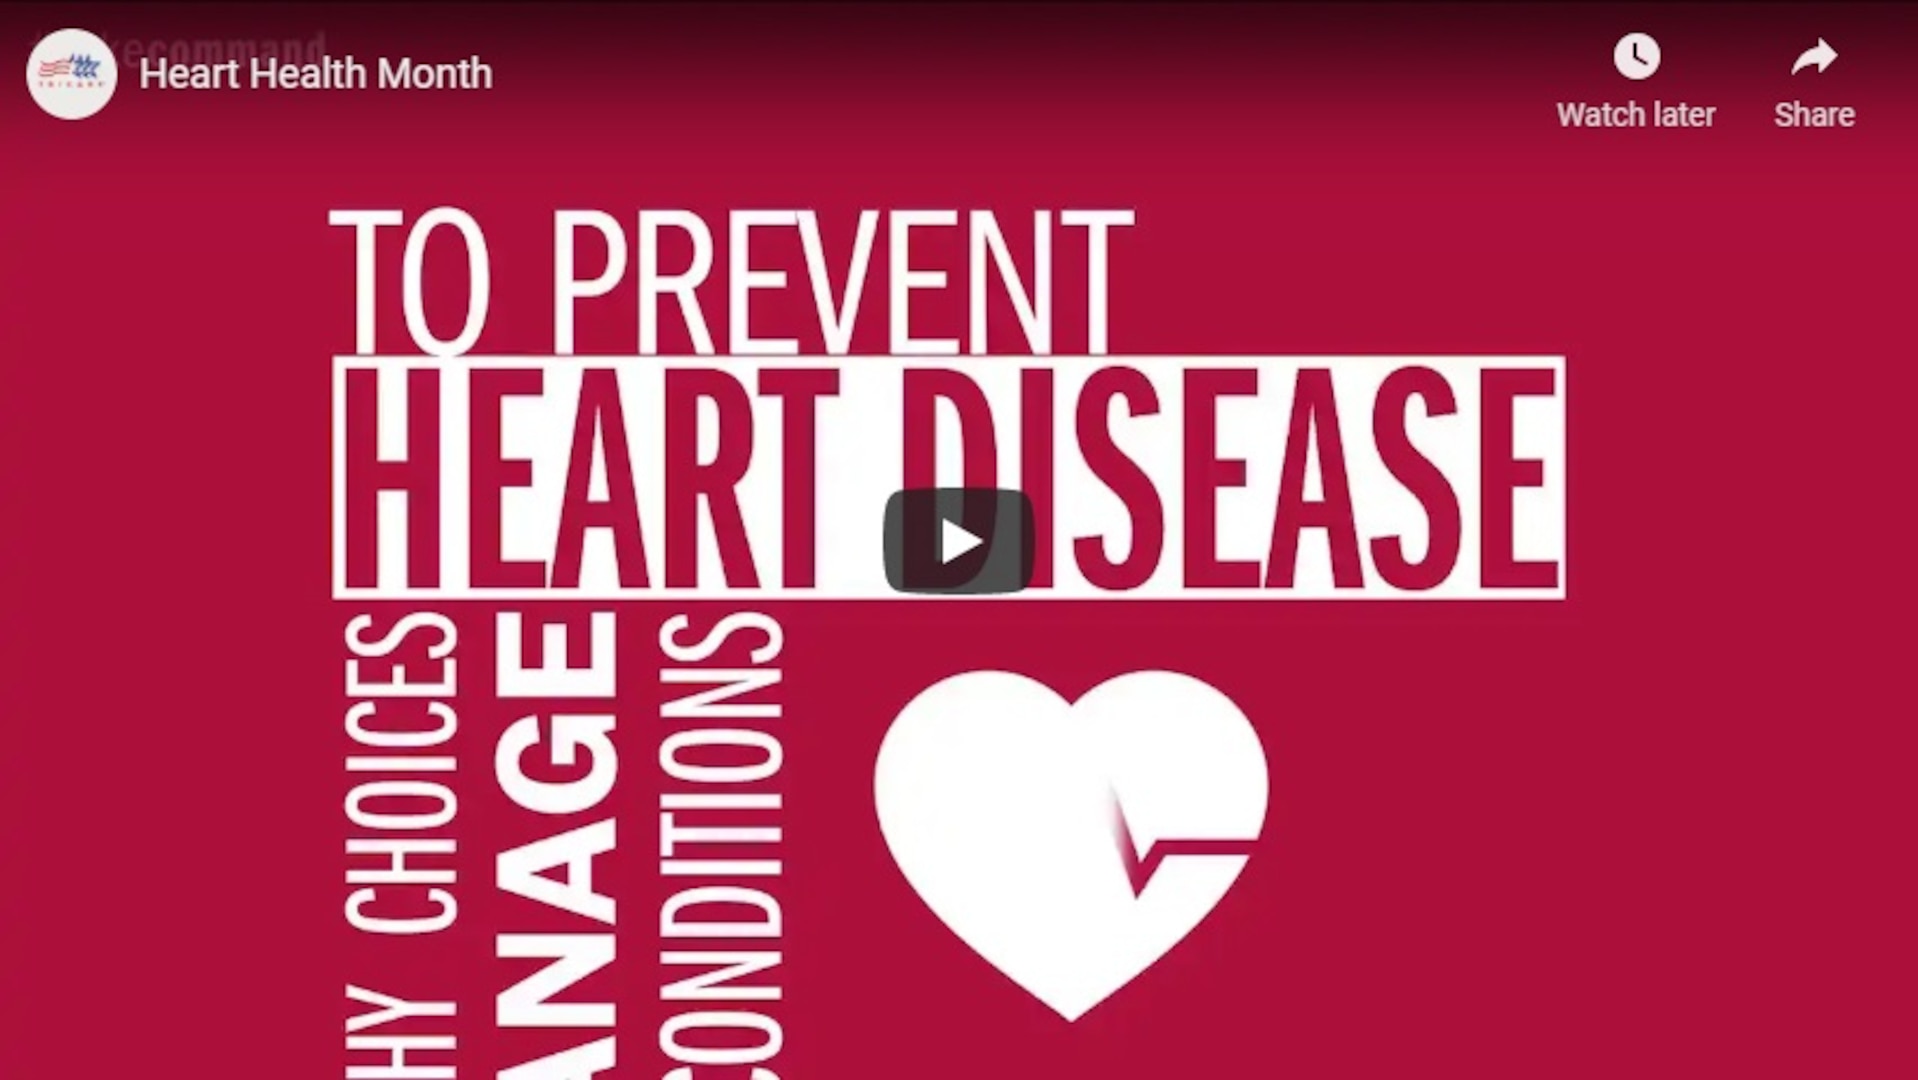 Stay heart healthy year round by following these tips.